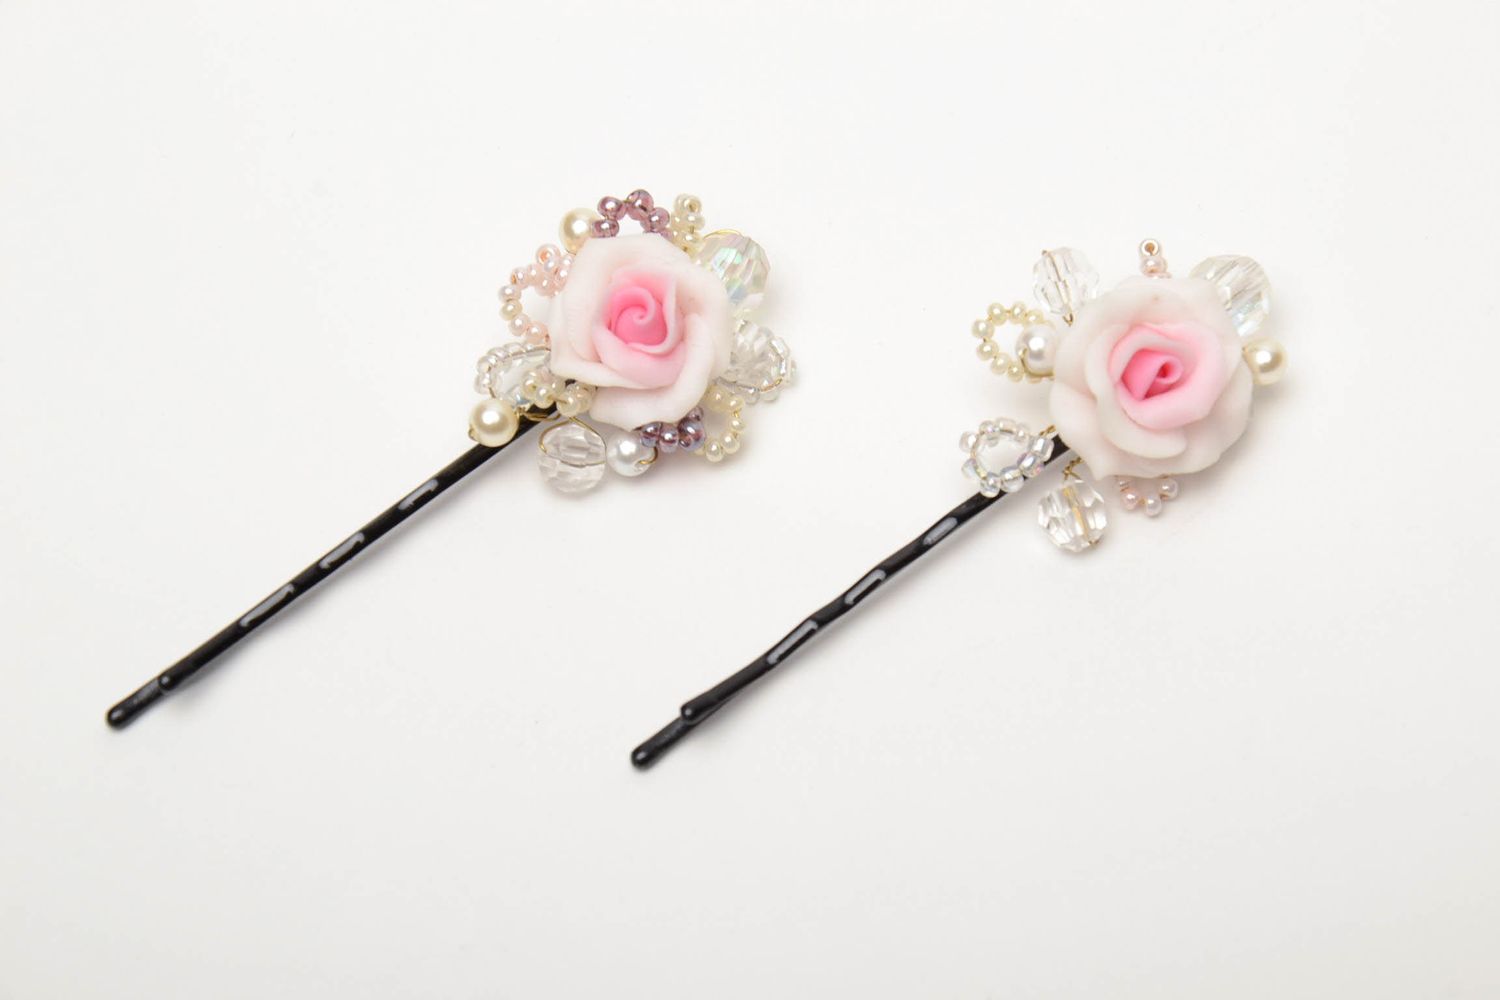 Handmade polymer clay flower hairpins with beads photo 2